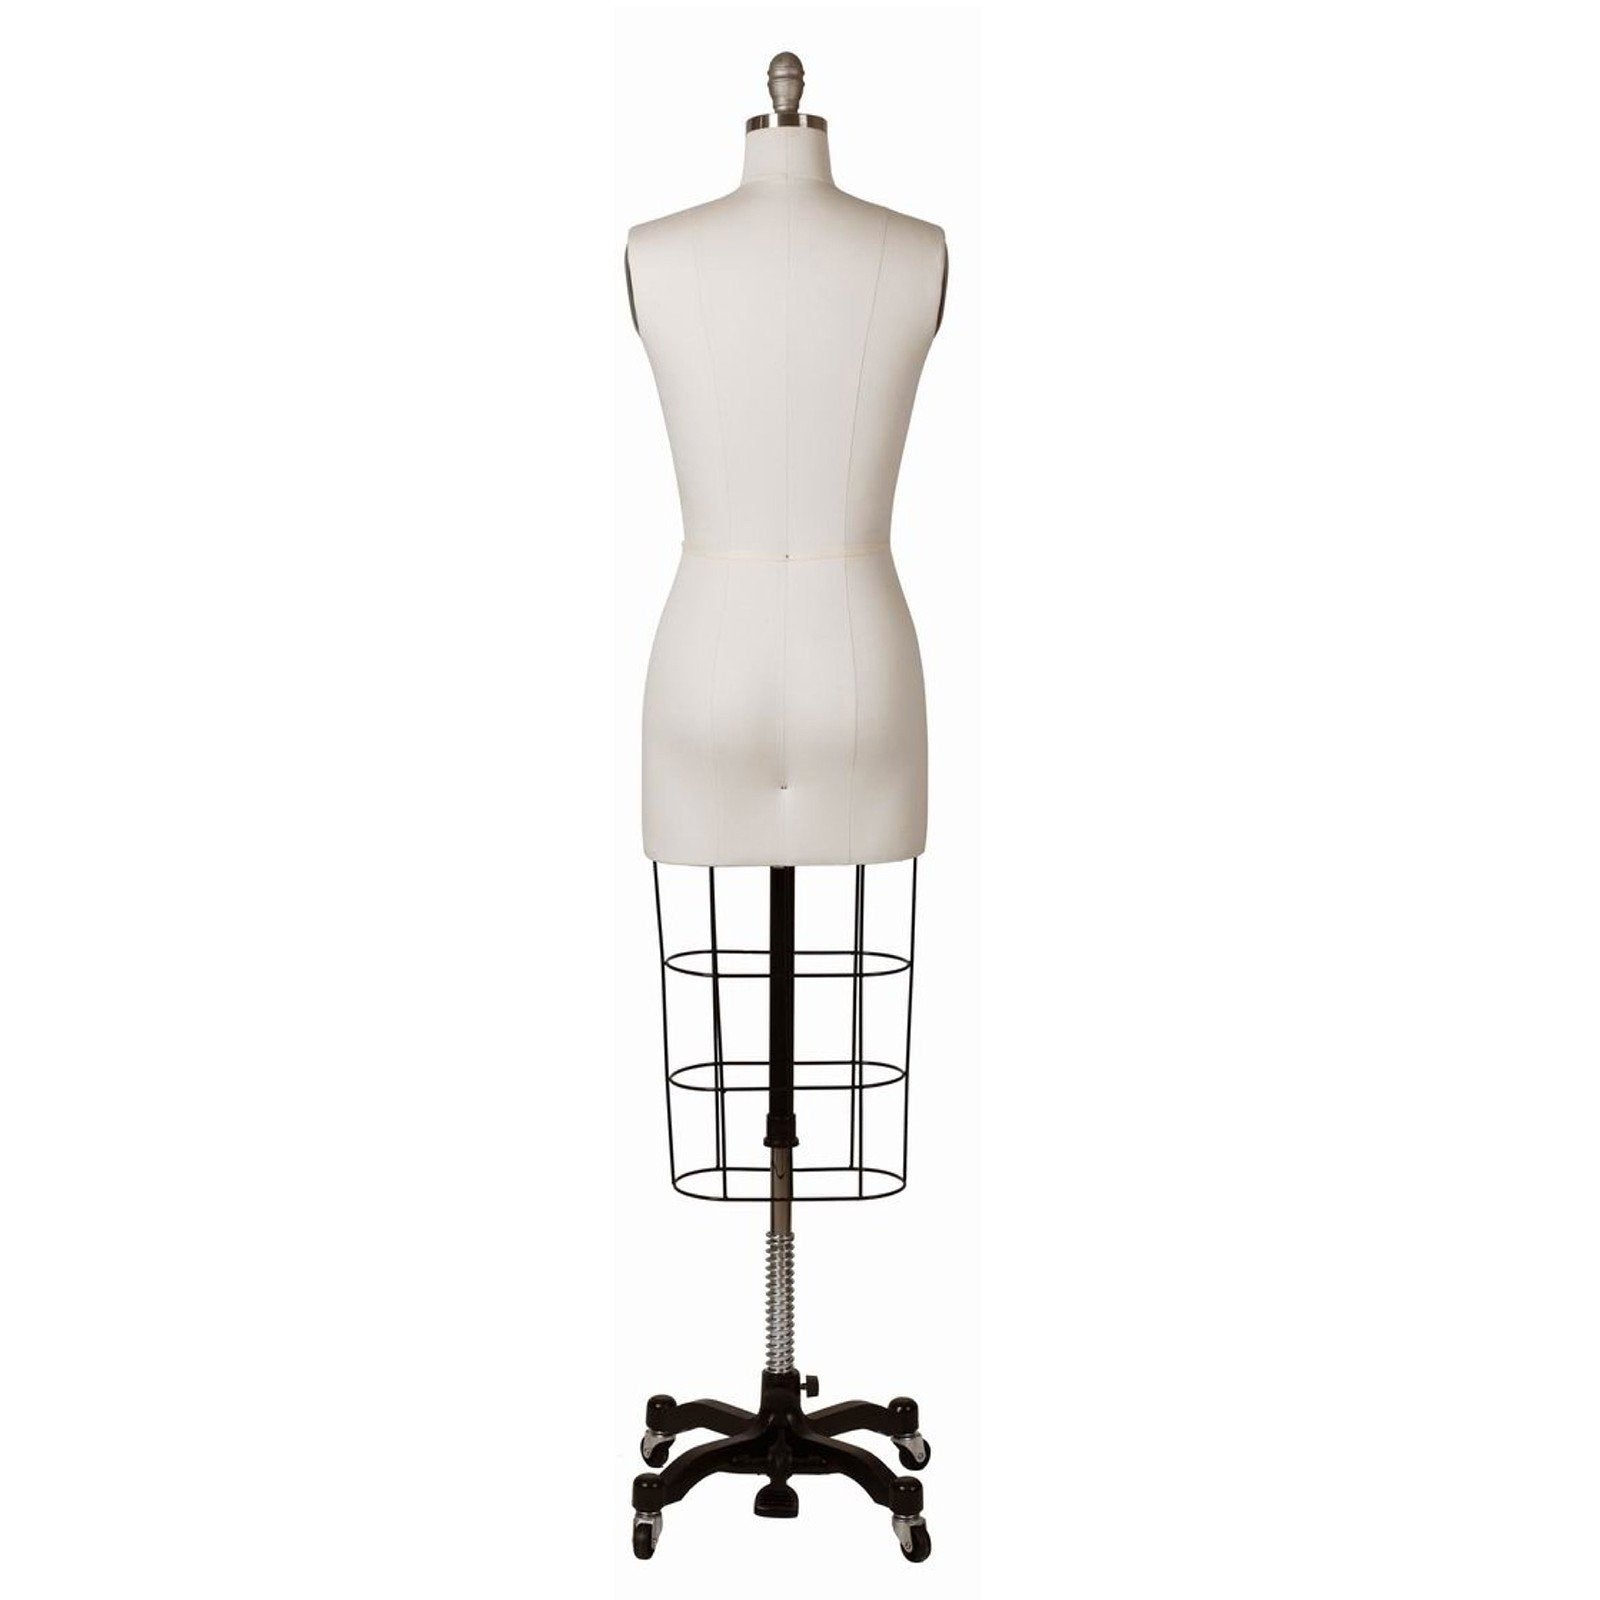 Professional Female Dress Form w/ Collapsible Shoulders